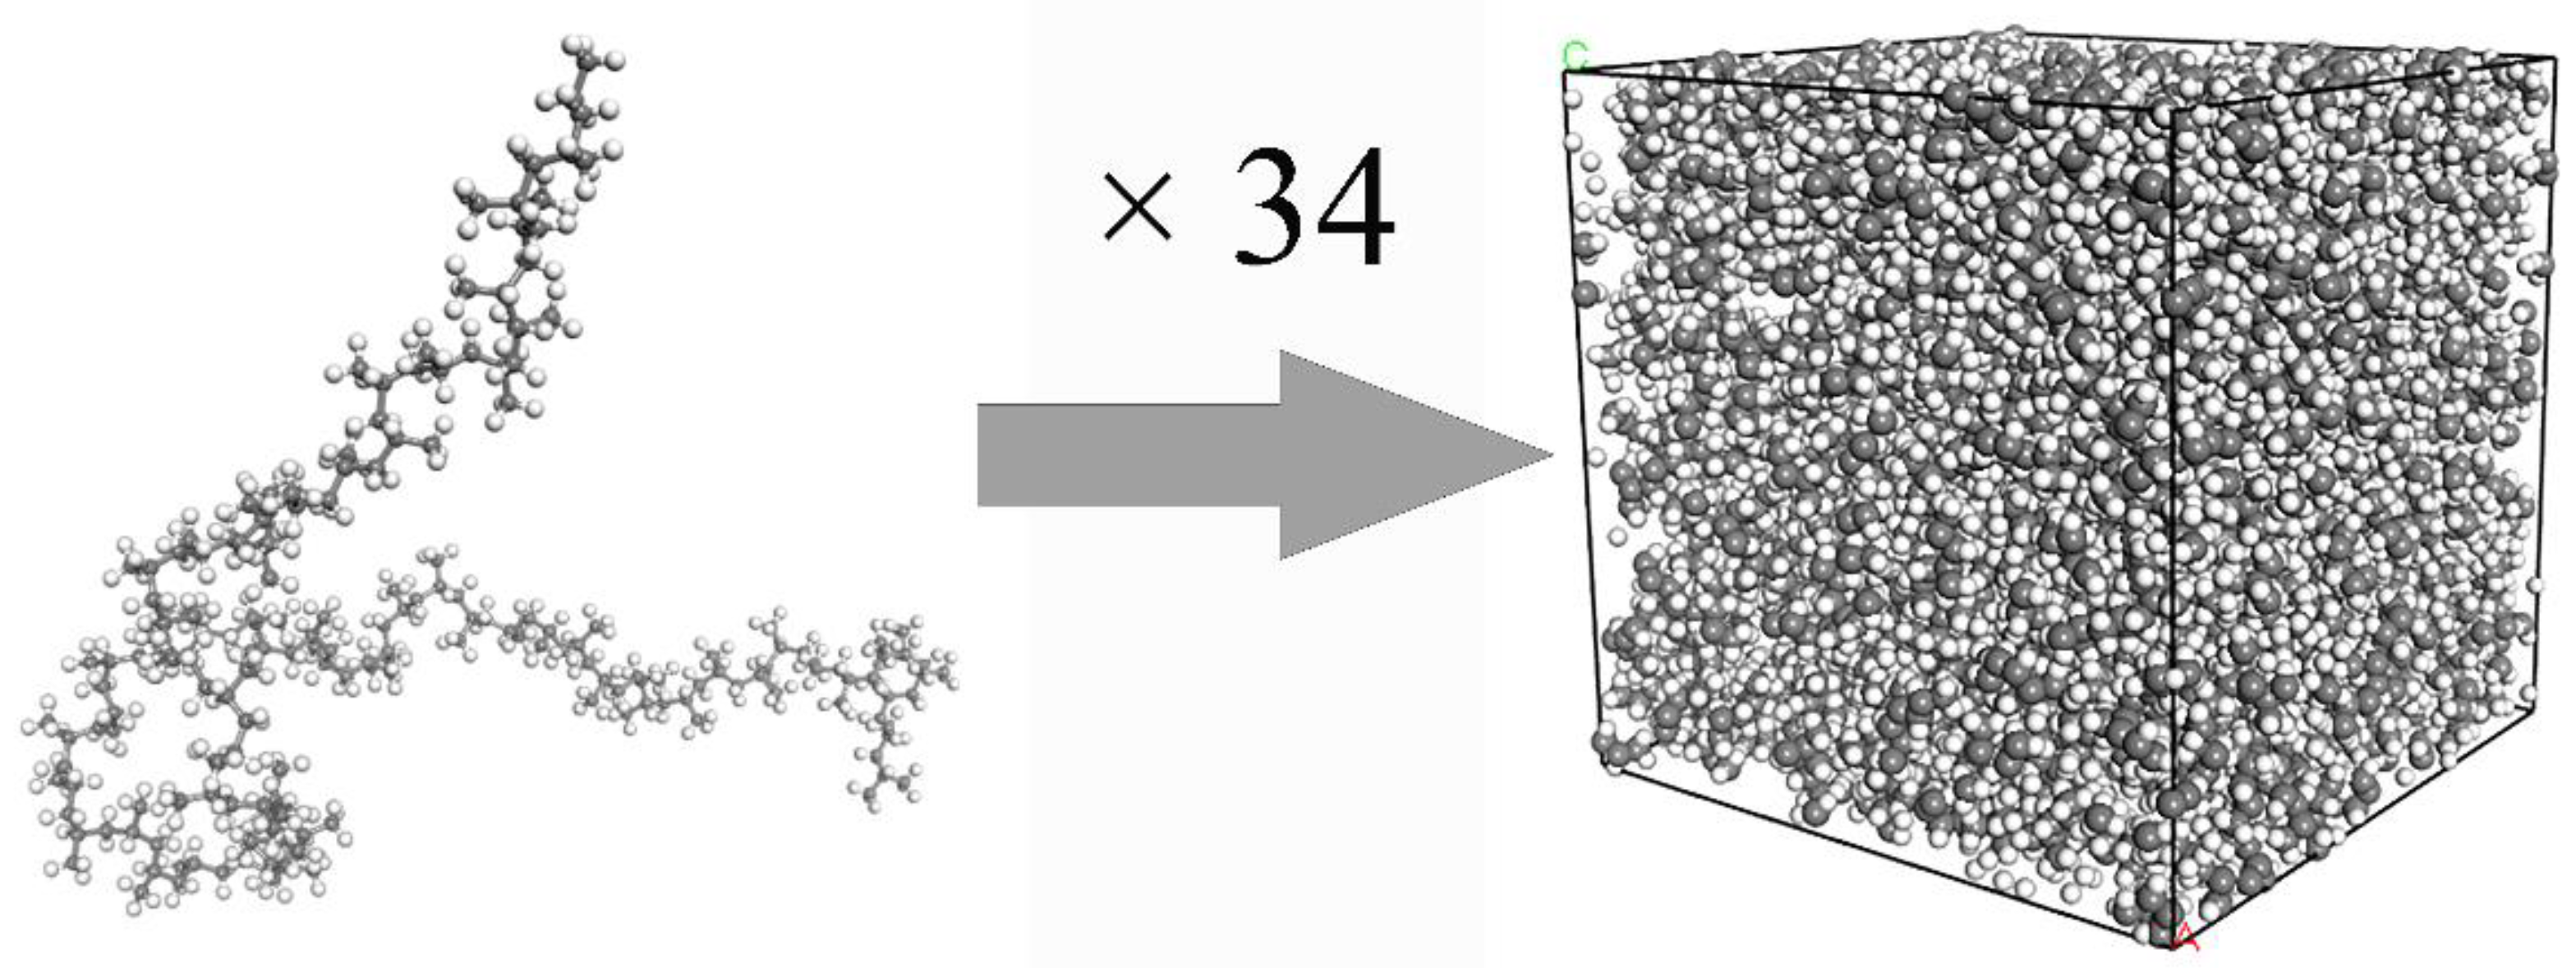 Polymers | Free Full-Text | Molecular Dynamics Simulation on the 